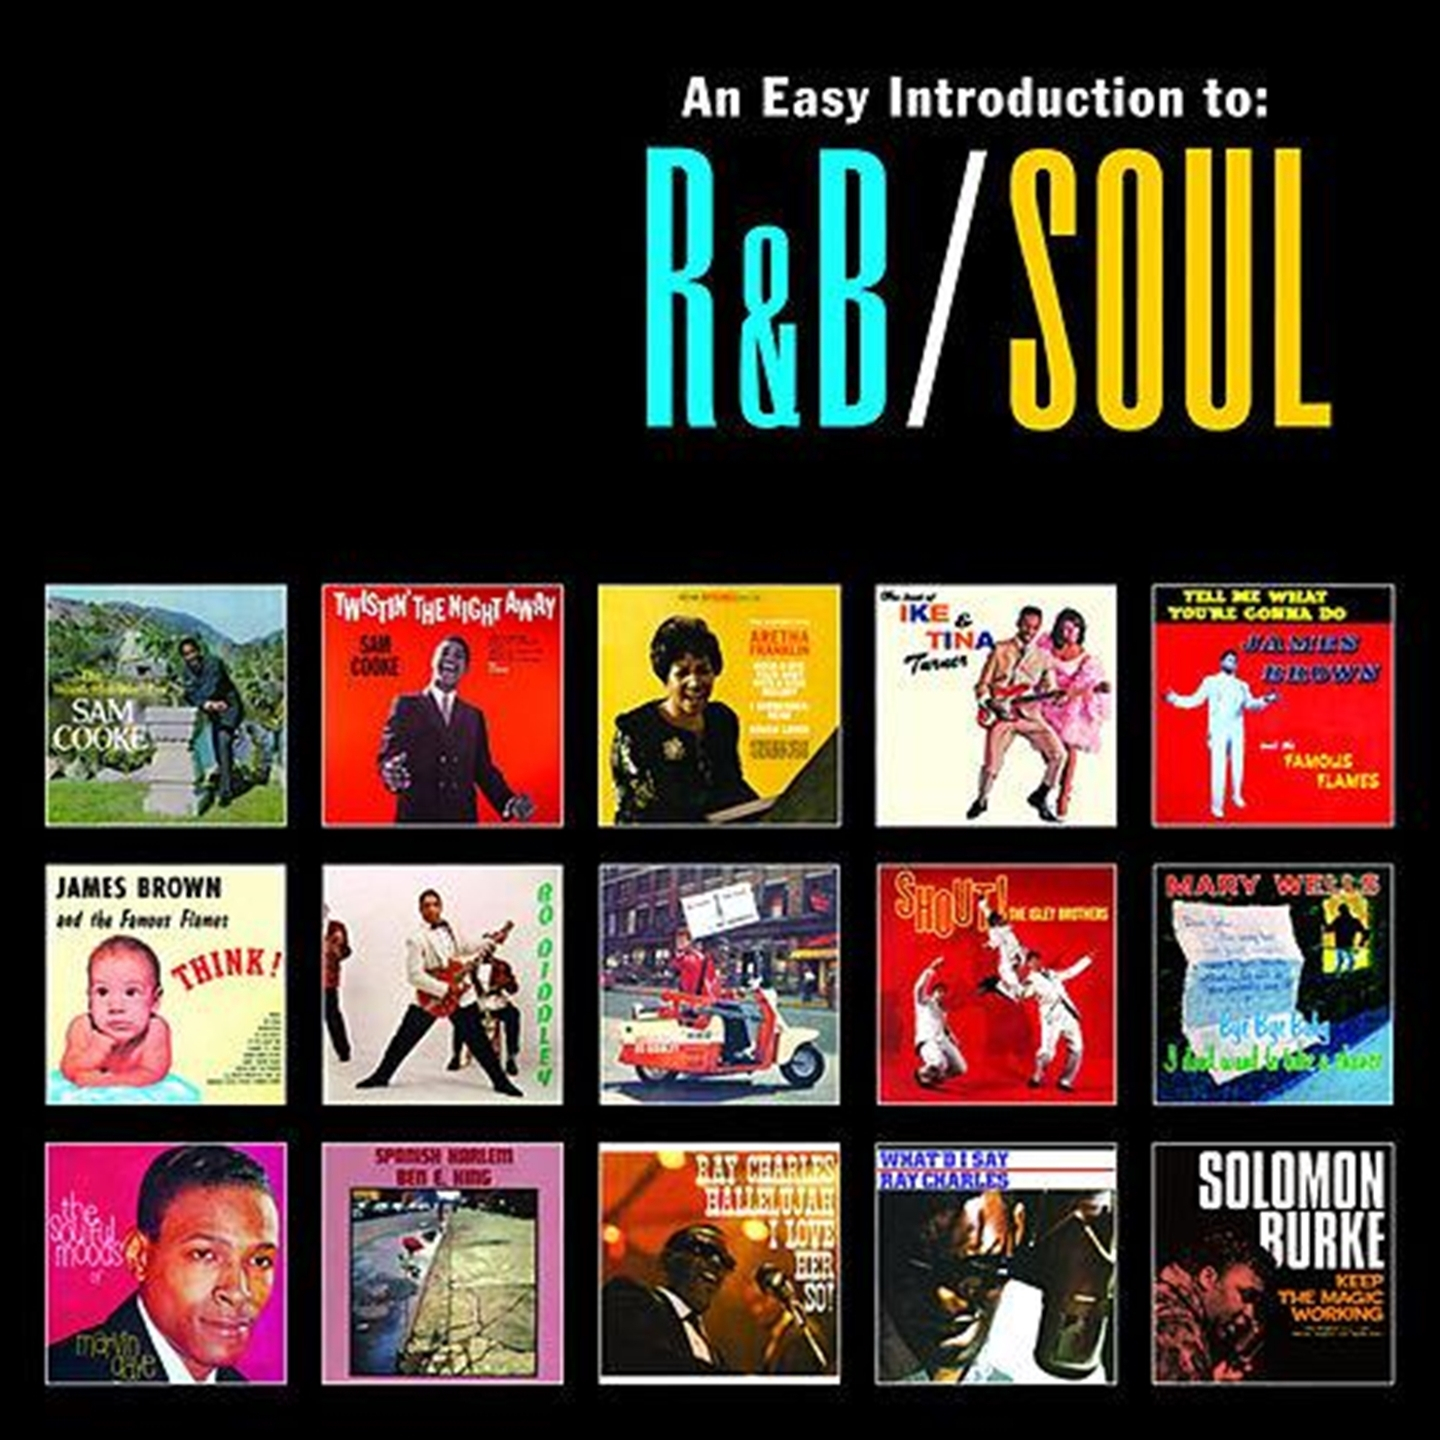 AN EASY INTRODUCTION TO R&B / SOUL (15 ALBUMS)